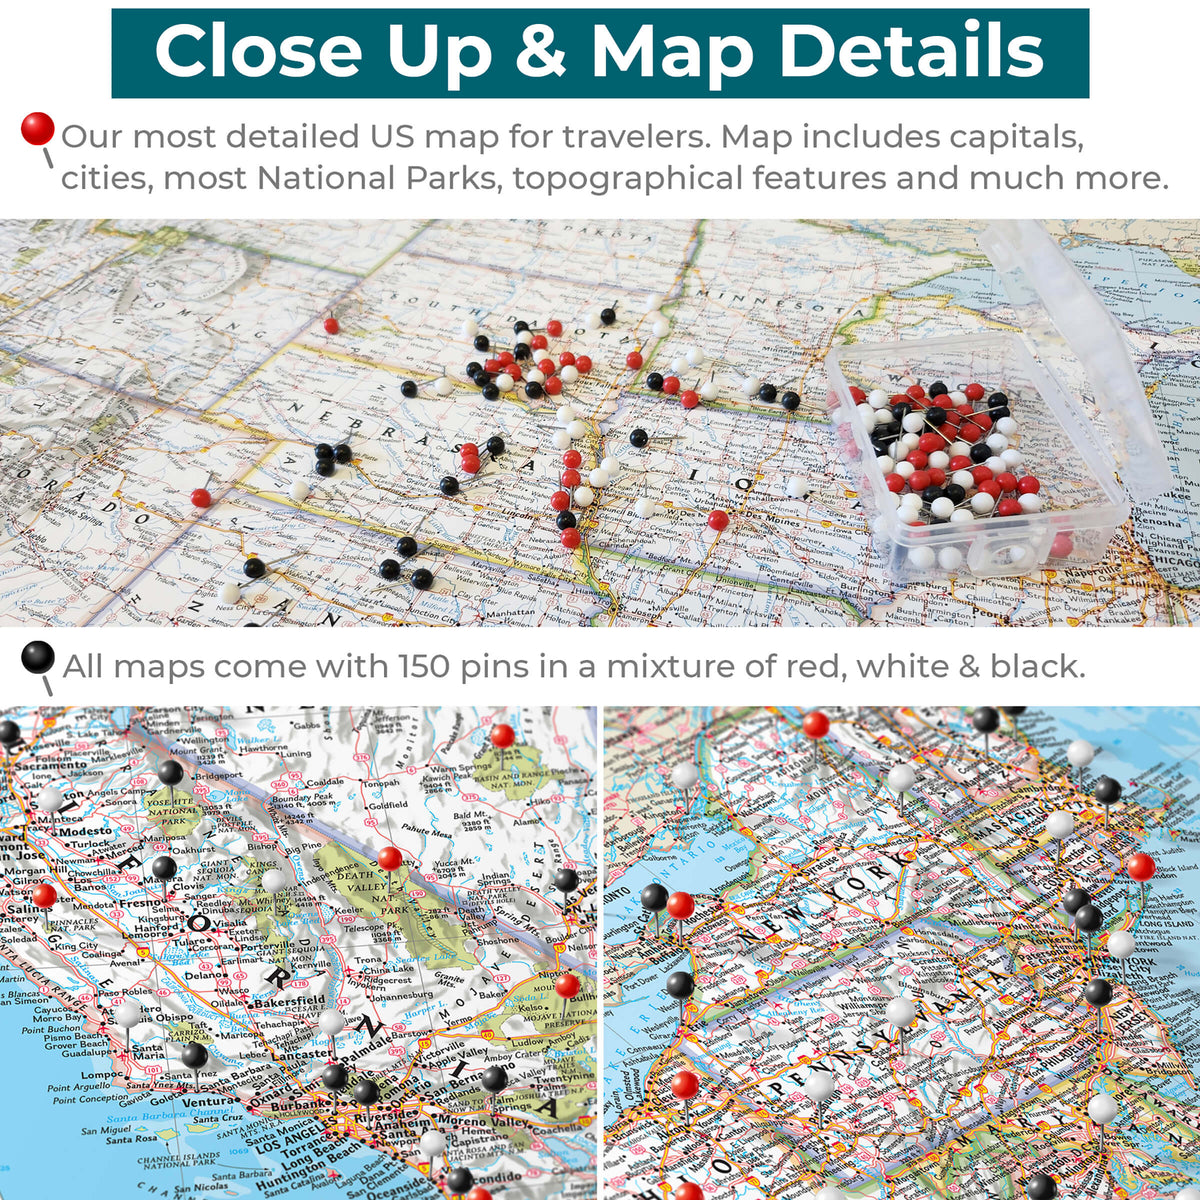 Classic USA Push Pin Travel Maps - Close up and Details